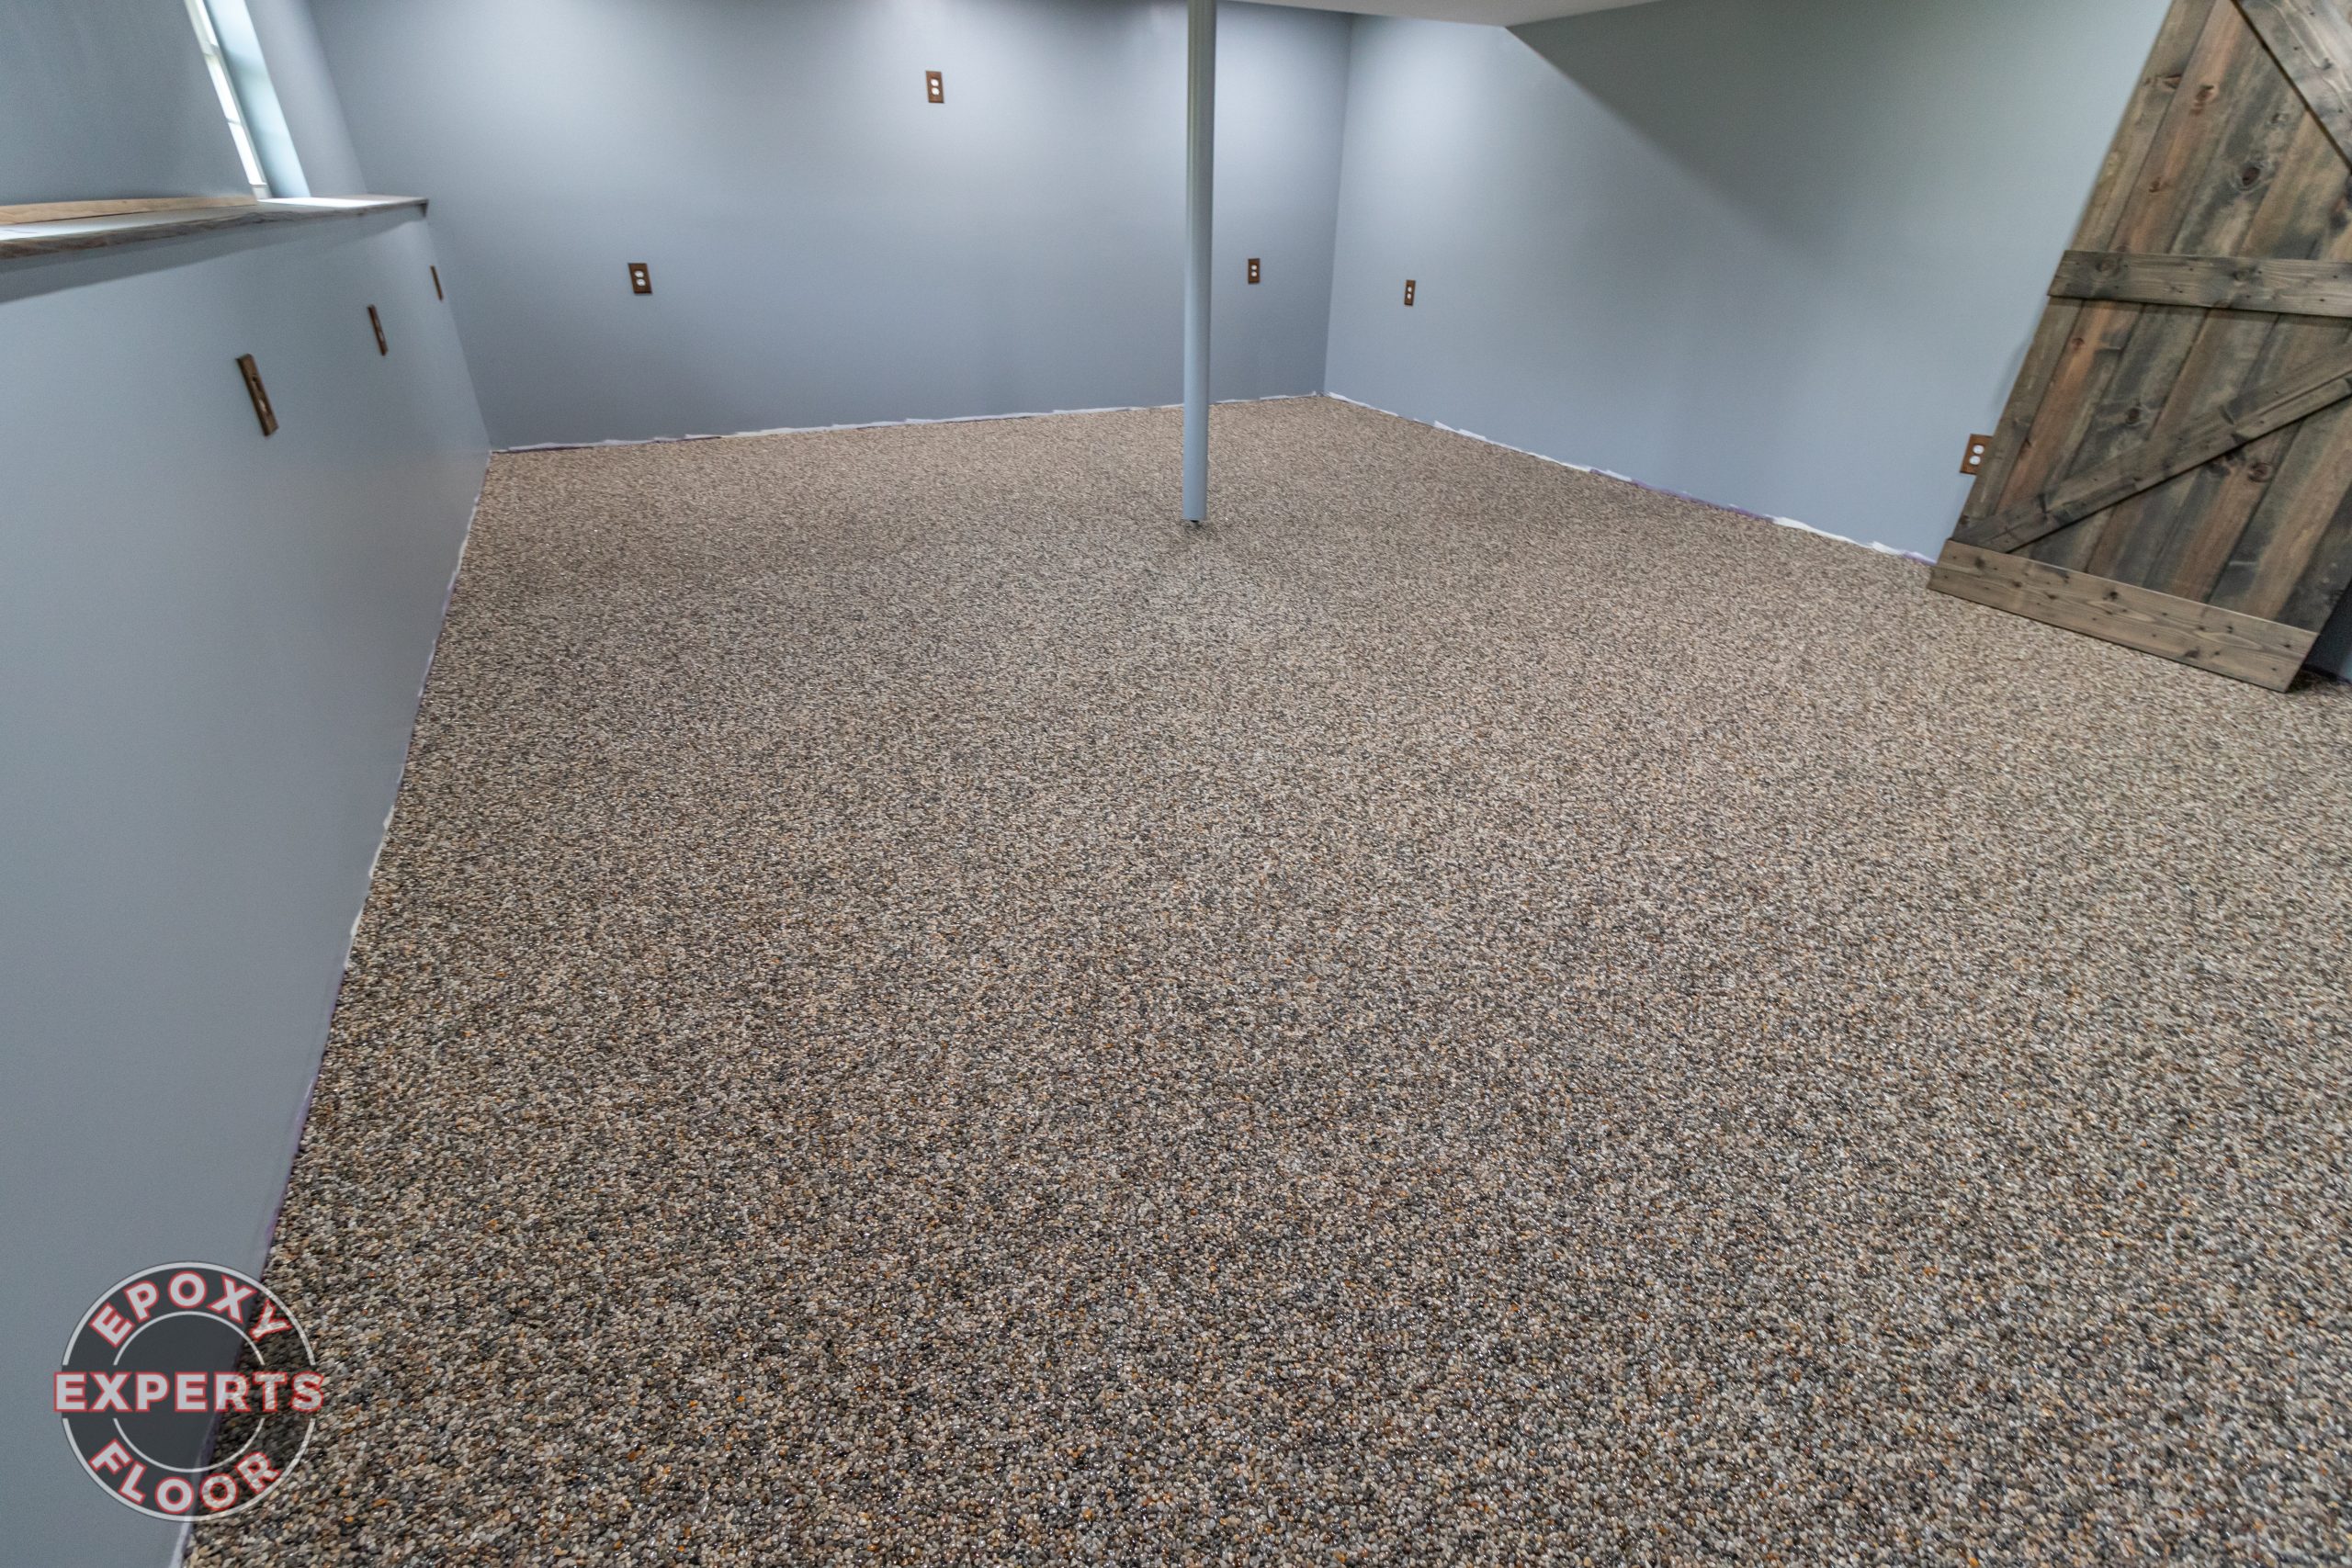 Epoxy flooring in basement by the Epoxy Floor Experts